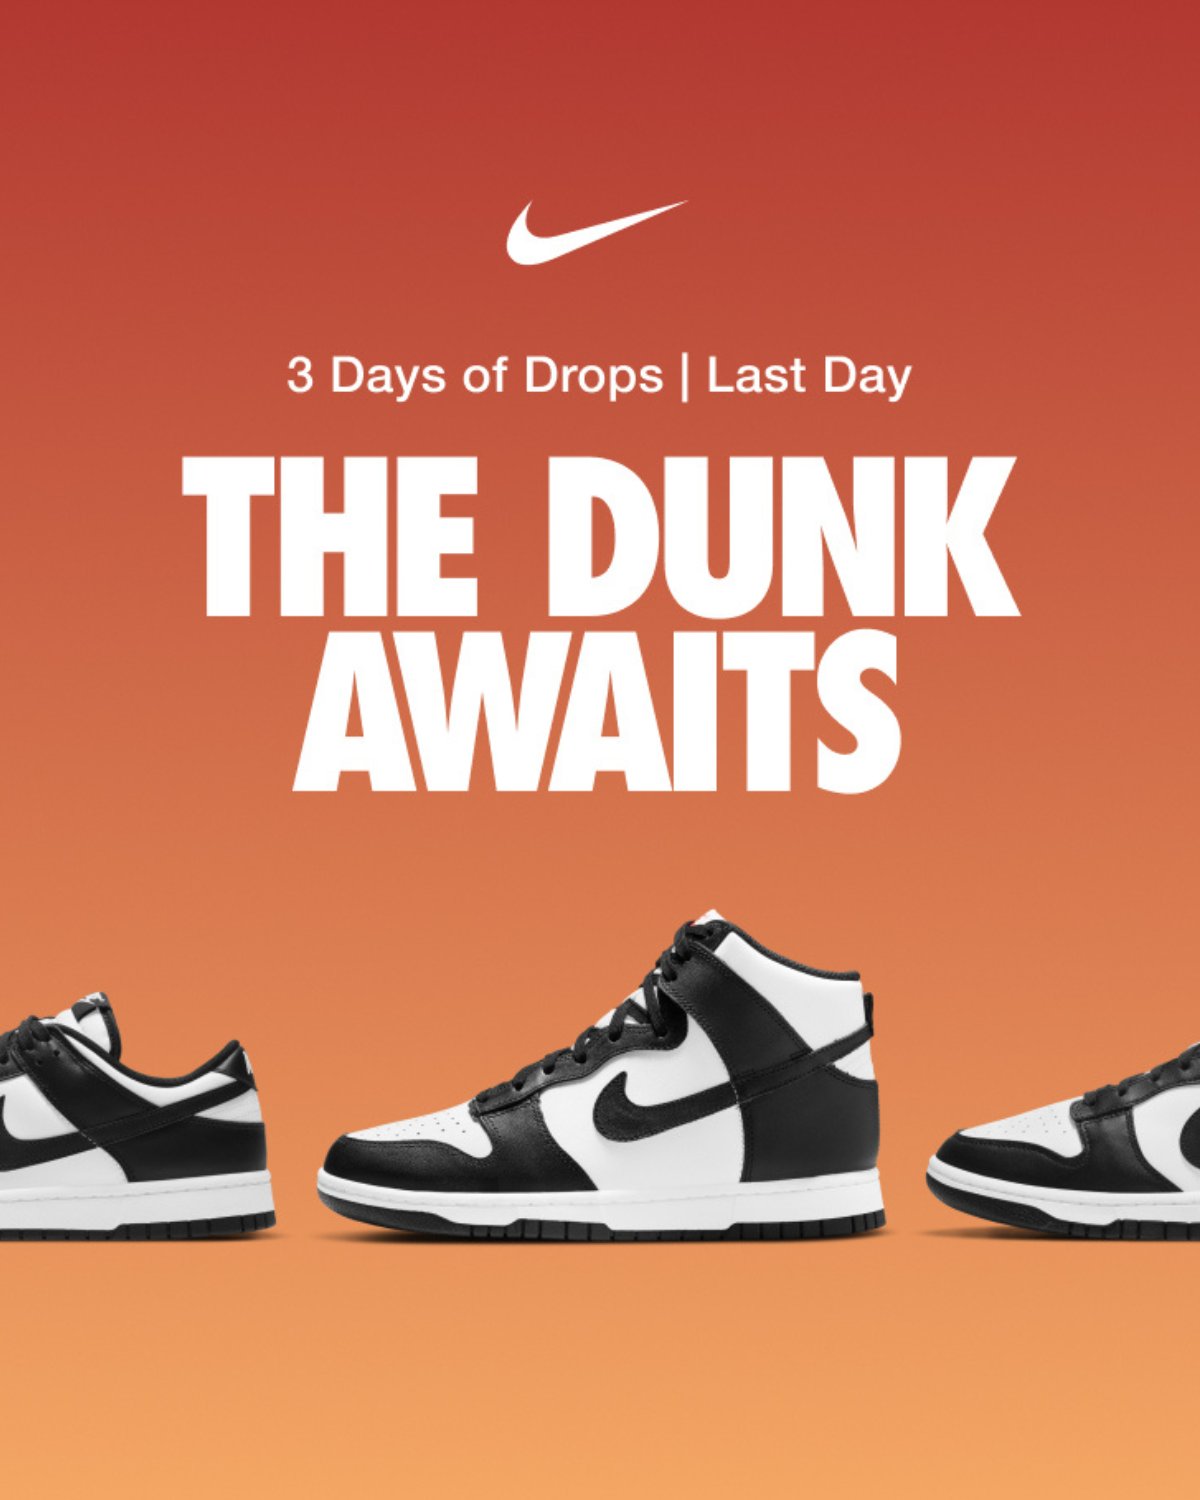 Nike.com on Twitter: "A Dunk you can't miss. 3 Days of Drops ends tomorrow,  and we've got 'Black/White' Dunks calling your name. 🤍🖤 Tap in to get  notified. https://t.co/rMaPnTI6gu https://t.co/oXKN37kXBf" / Twitter